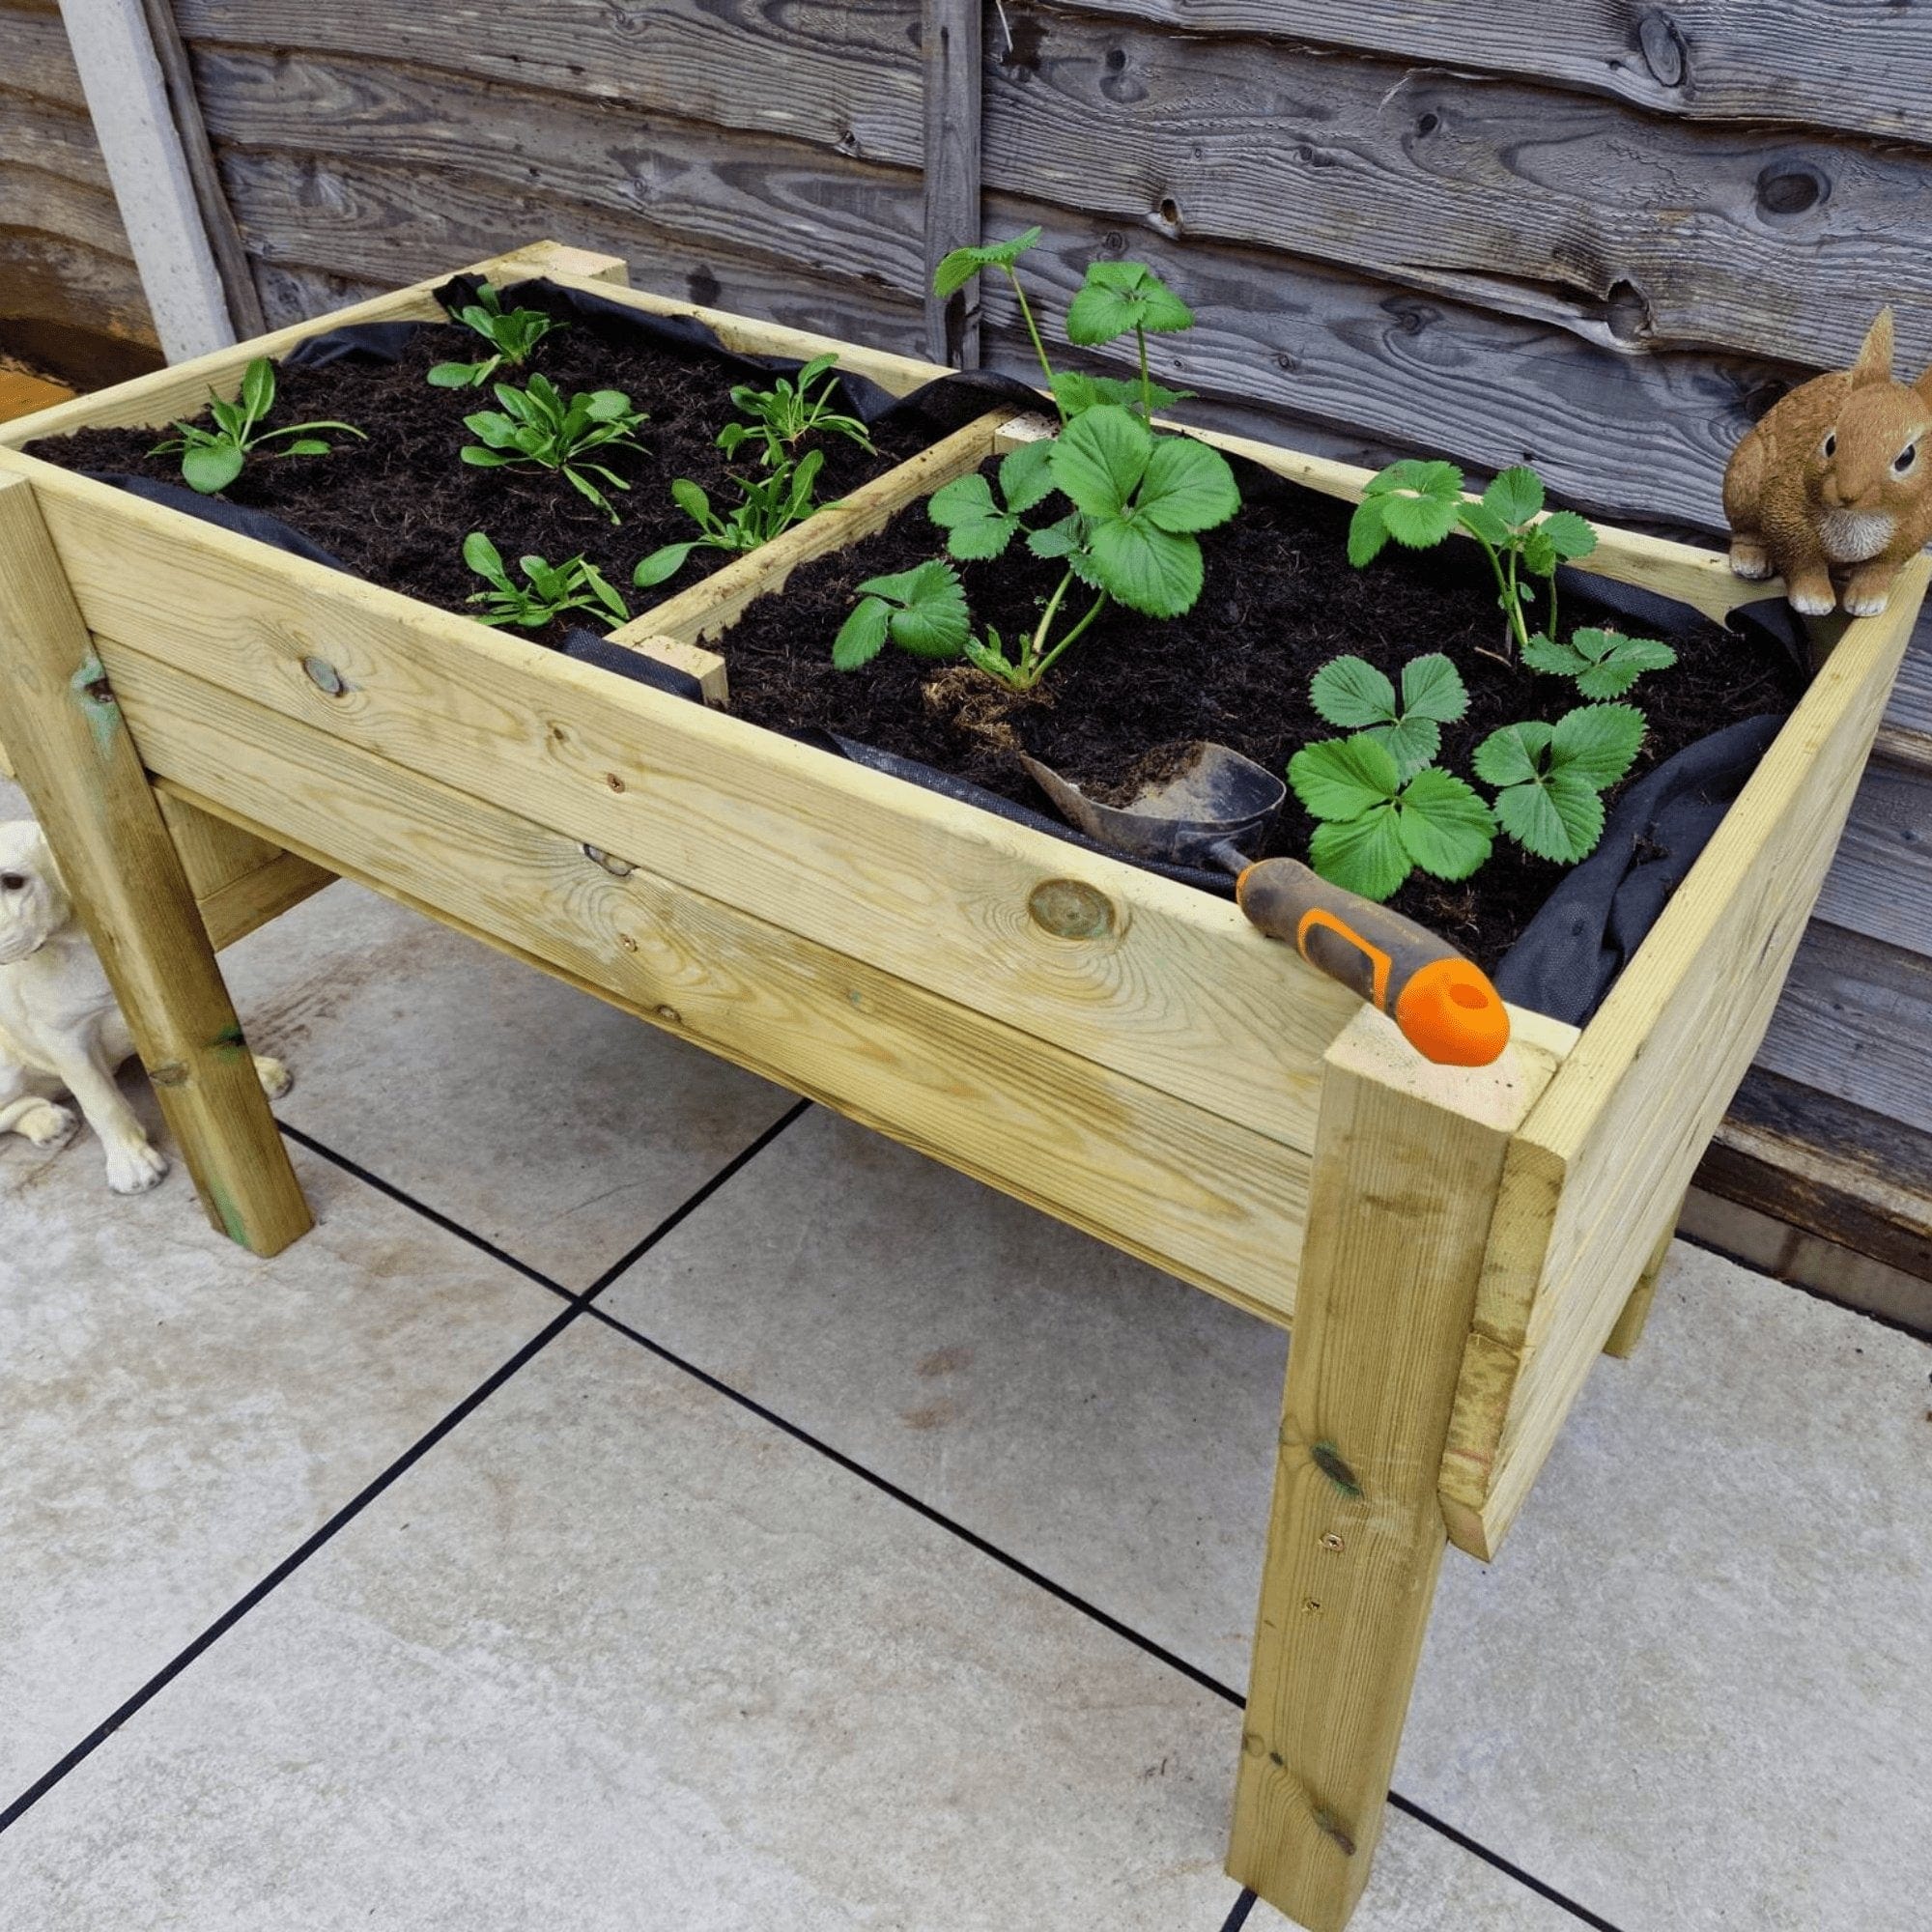 Redwood Veg Trug providing a durable and attractive home for plants.